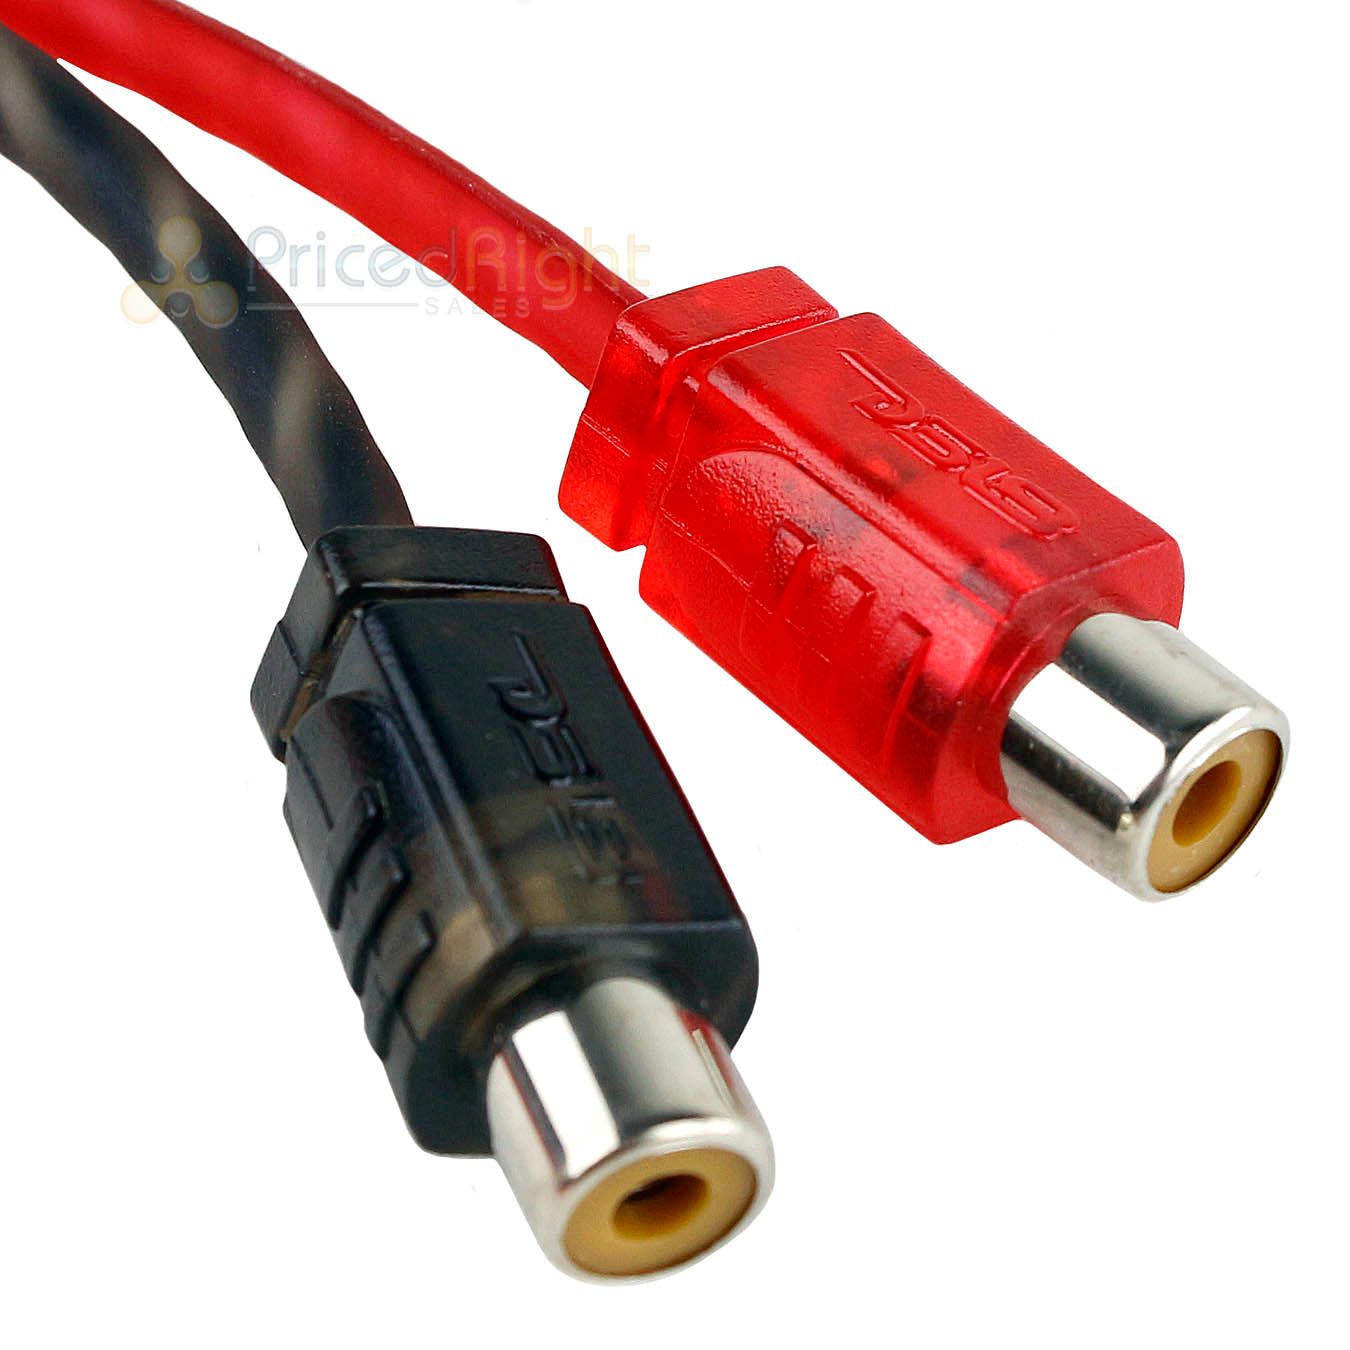 Ds18 Rca Splitter 1 Male to 2 Female Y Connector Car Audio Cable Rca1m2f 2 Pack